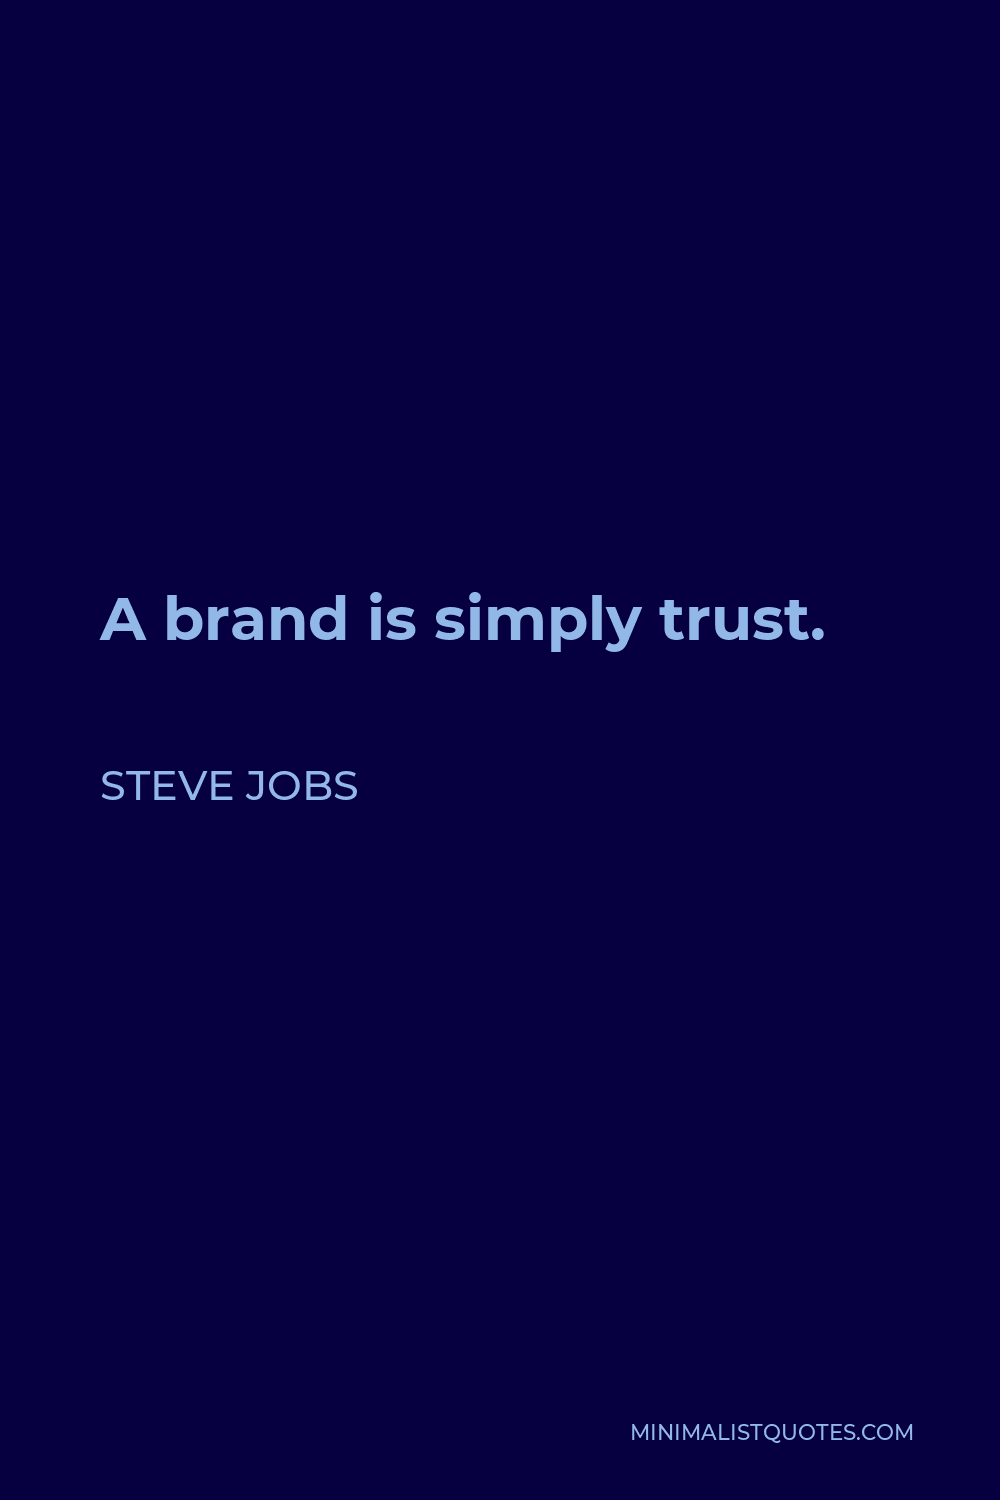 Steve Jobs Quote - A brand is simply trust.